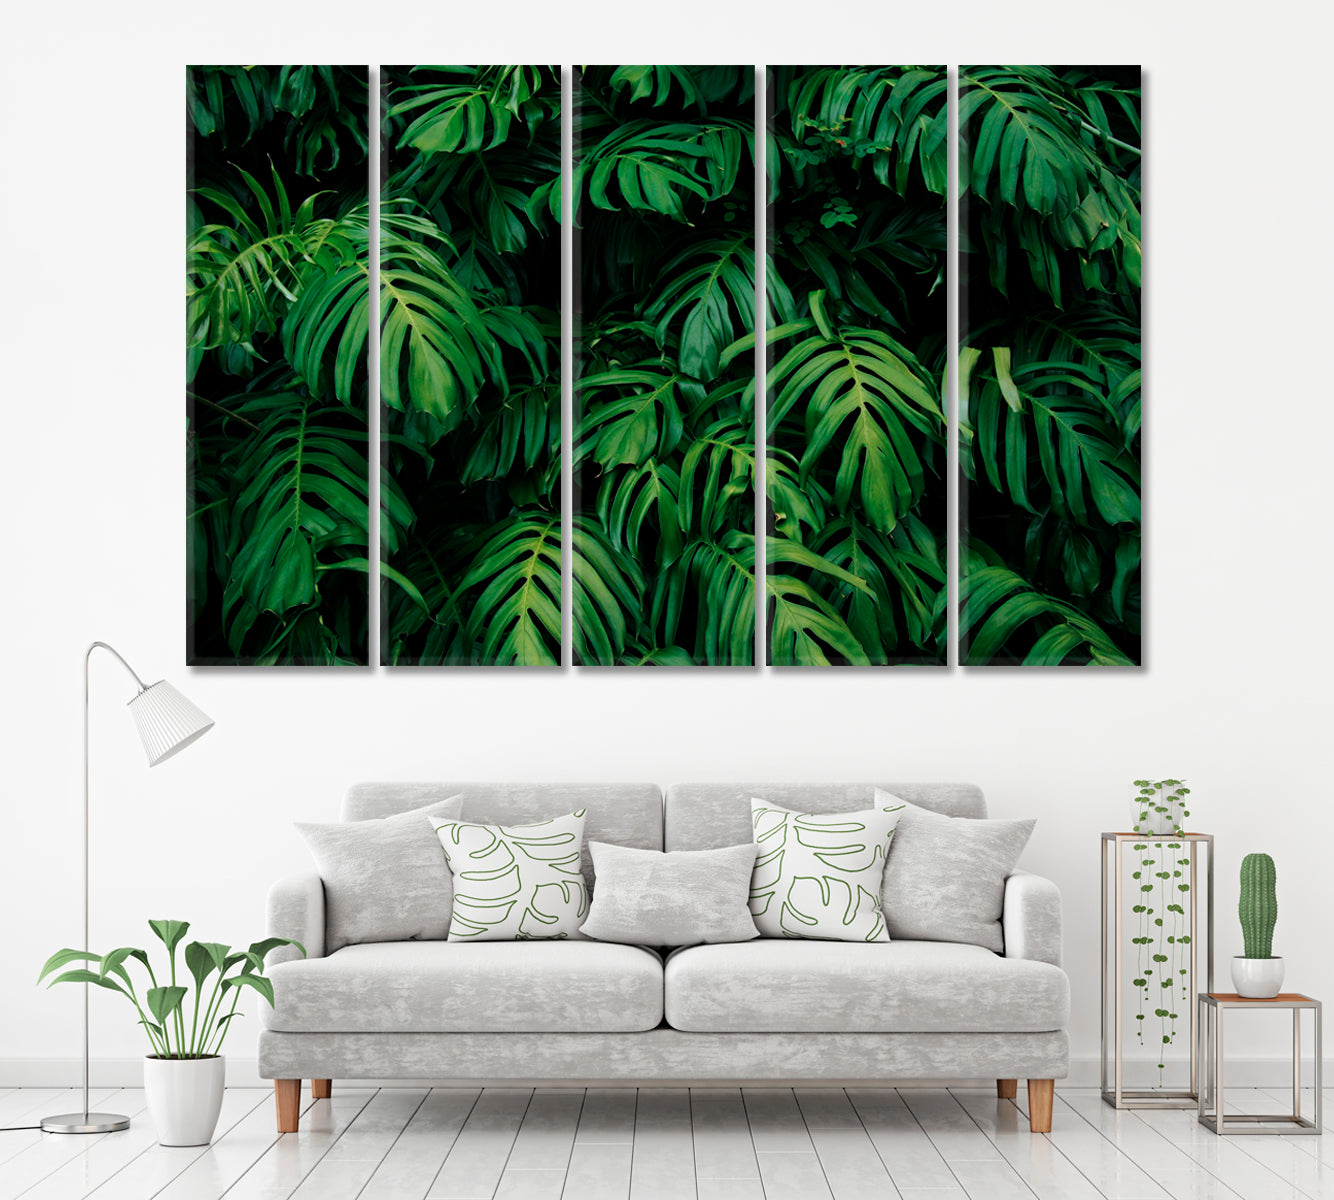 Green Leaves of Monstera Philodendron Plant Canvas Print ArtLexy 5 Panels 36"x24" inches 